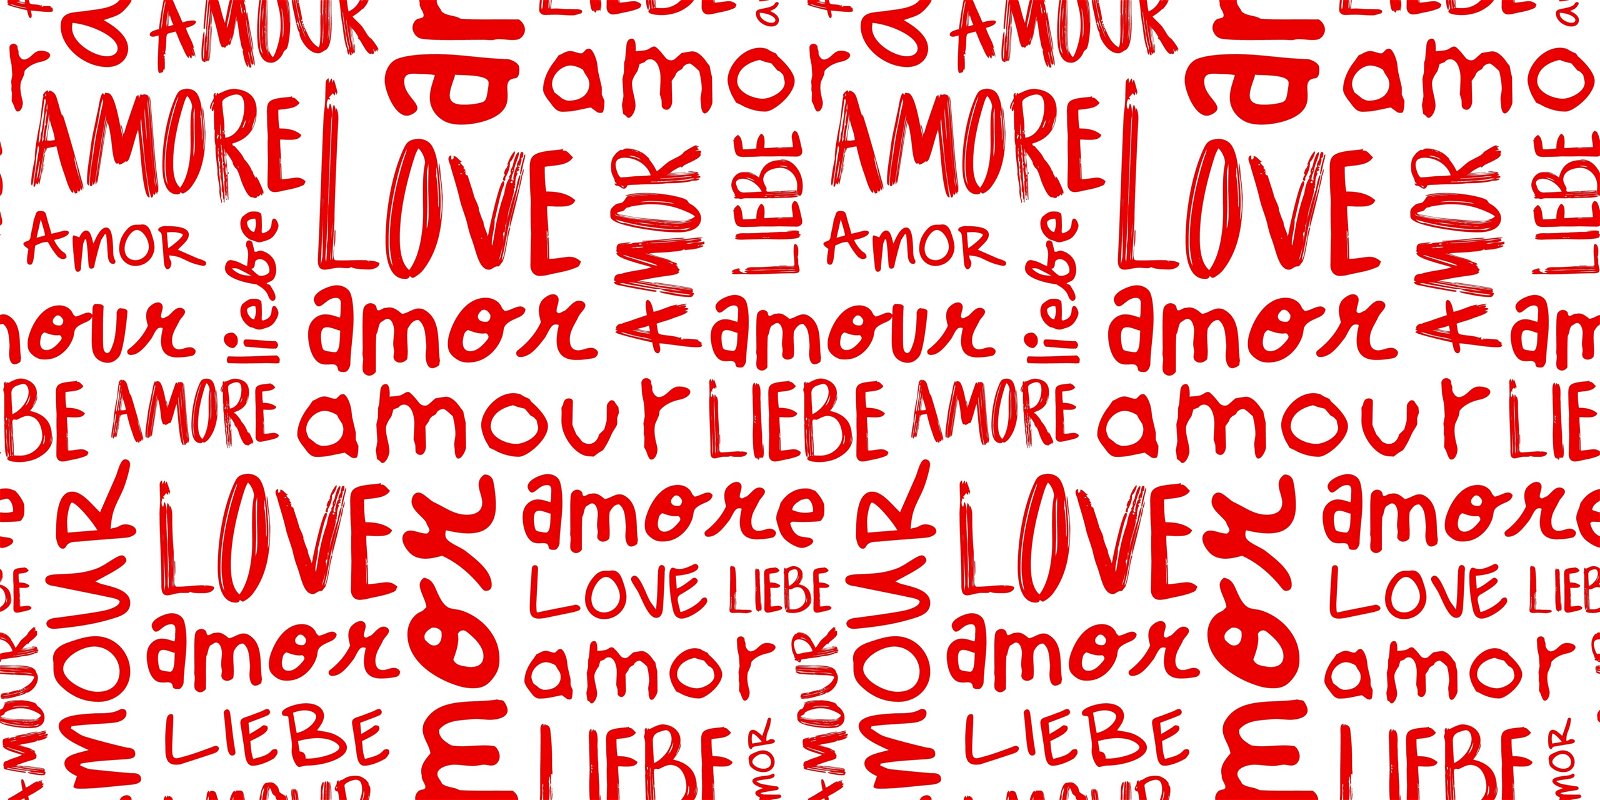 'I love you' in different languages